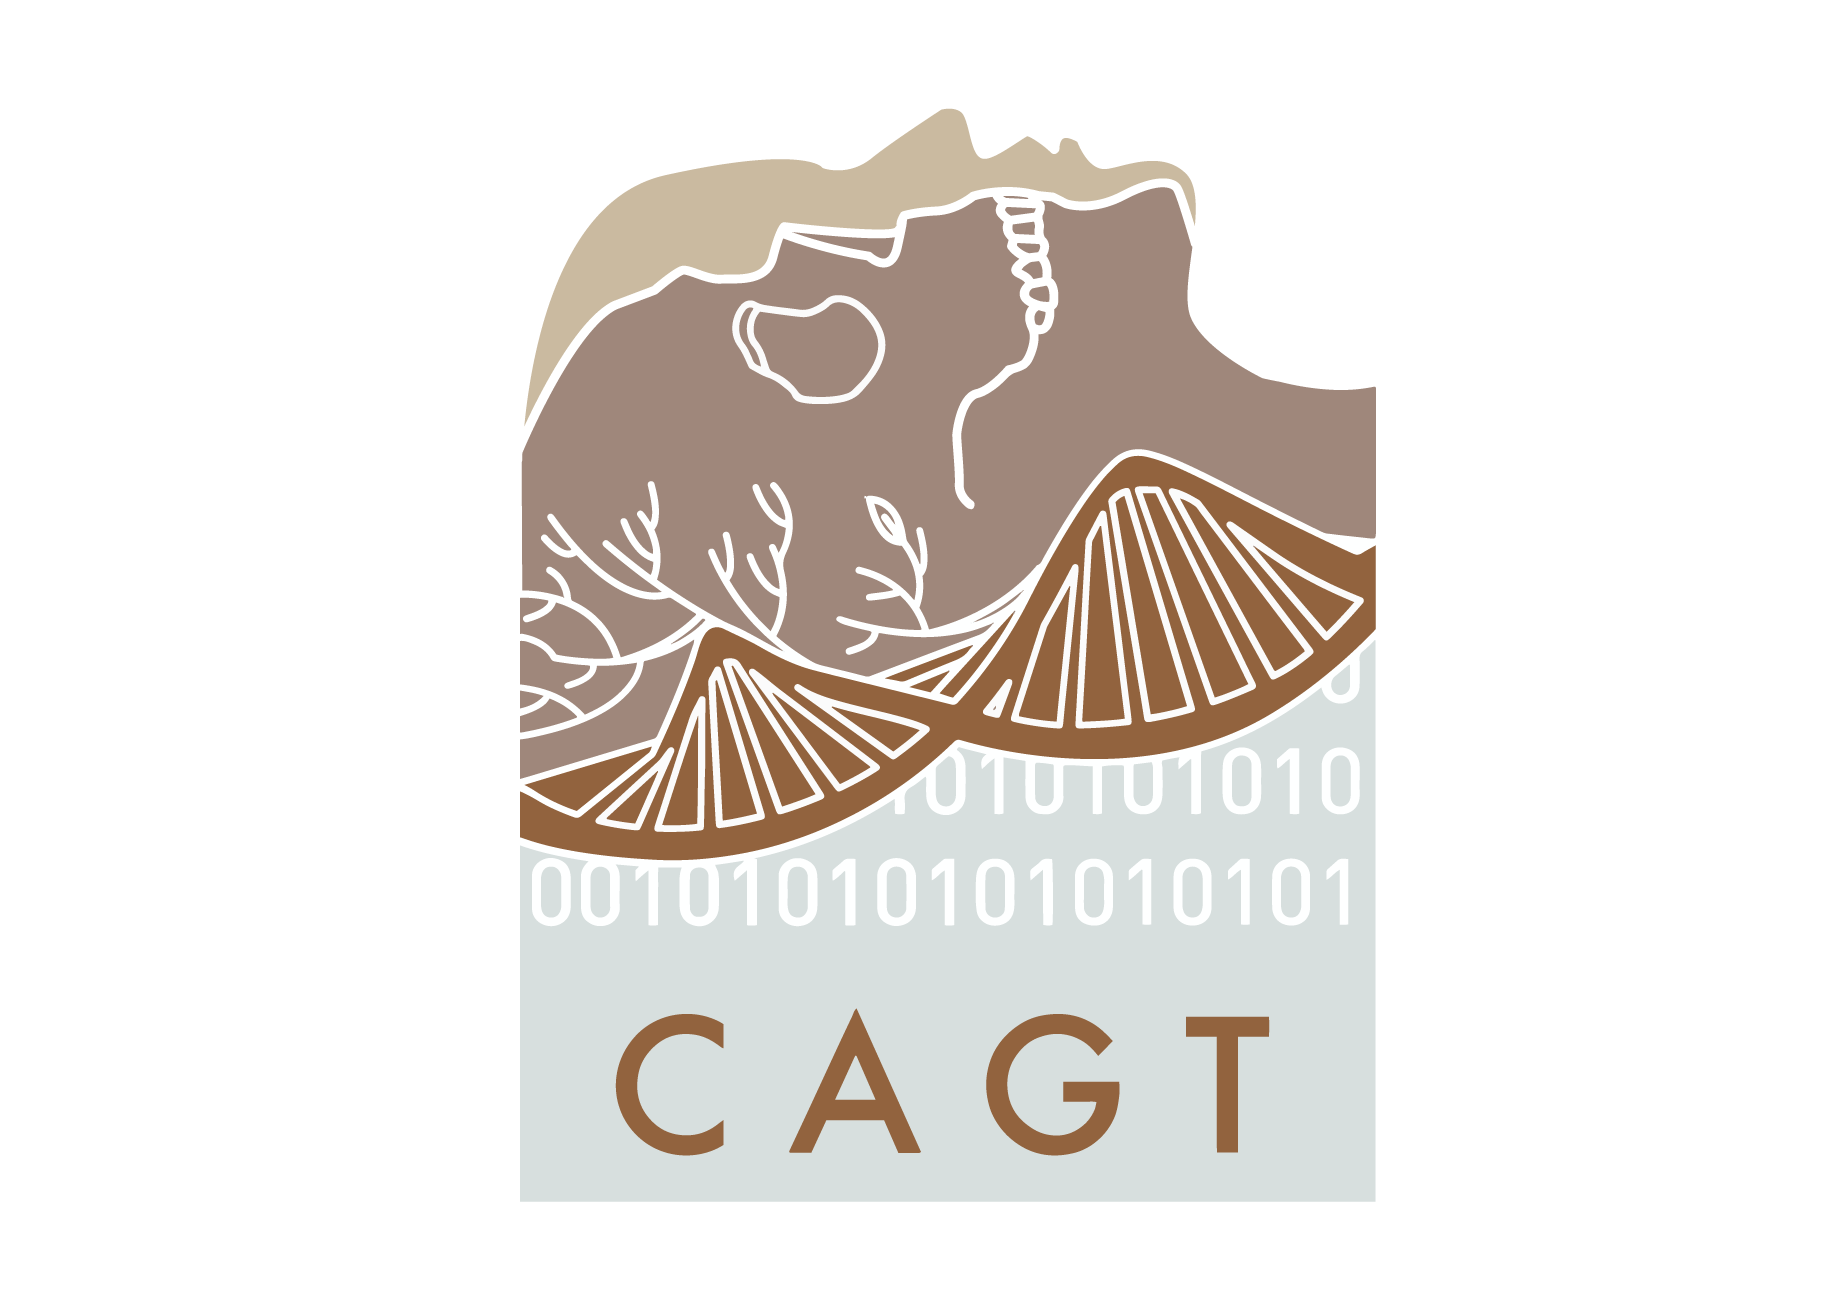 Our sponsor: Centre for Anthropobiology & Genomics of Toulouse (CAGT)